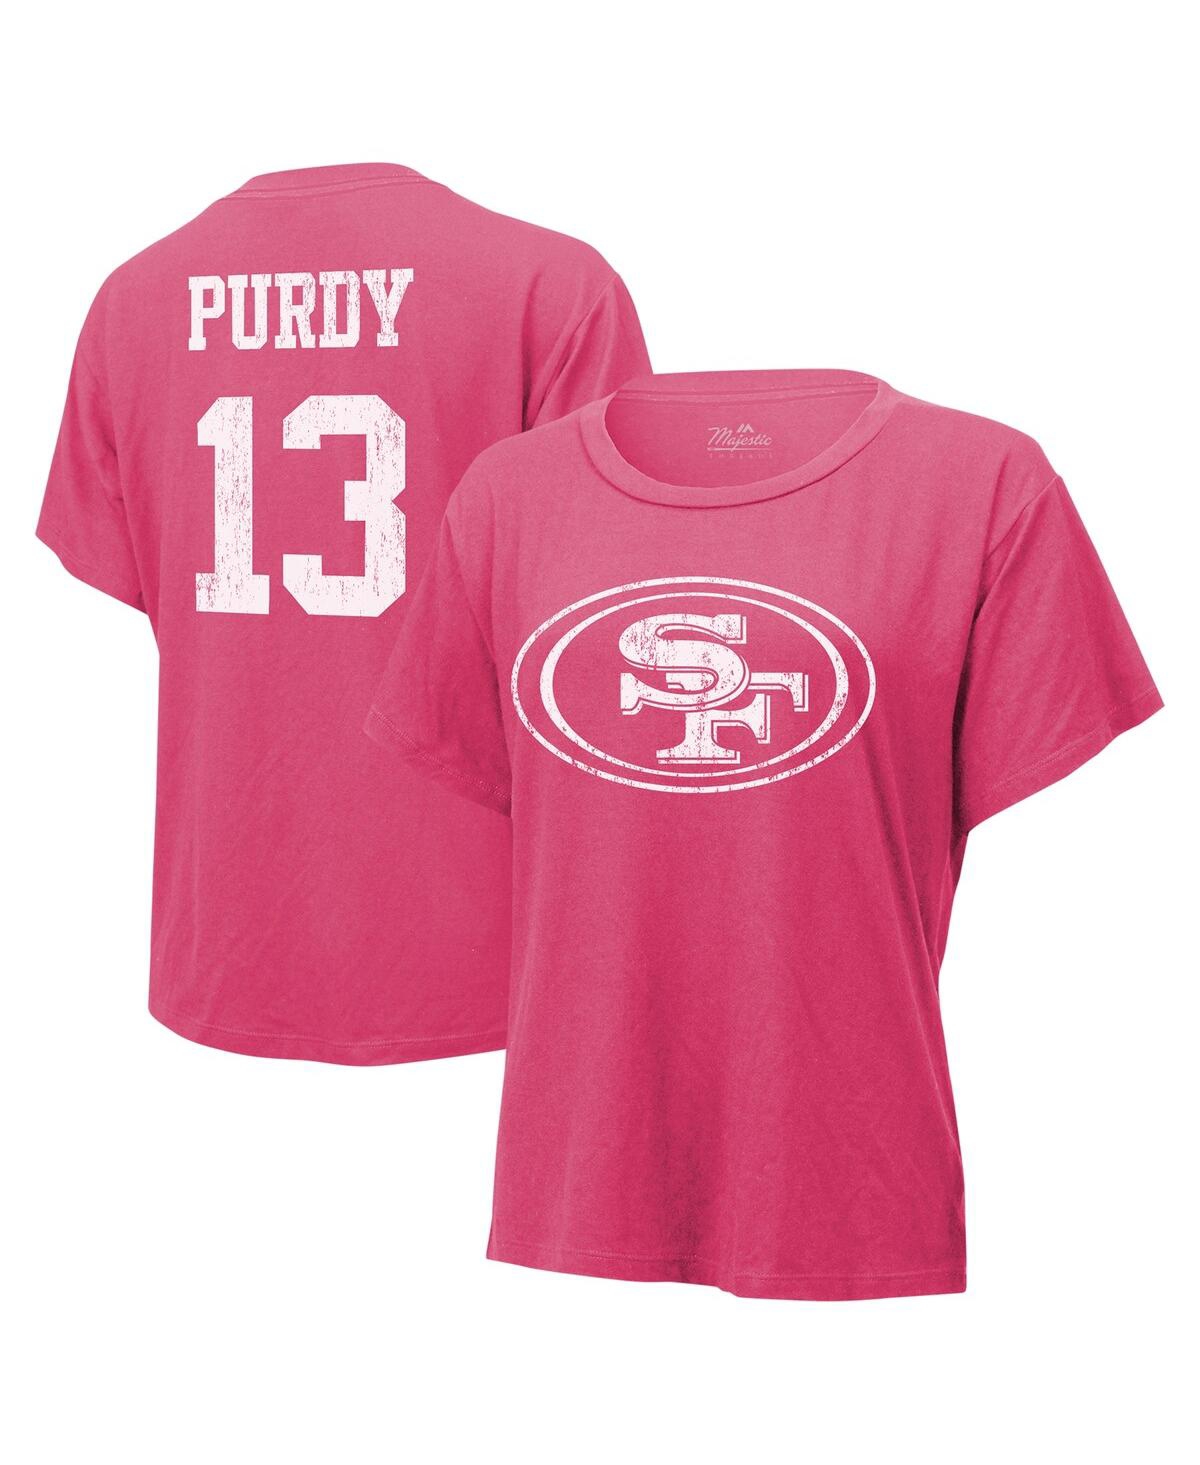 Women's Majestic Threads Brock Purdy Pink Distressed San Francisco 49ers Name and Number T-shirt - Pink